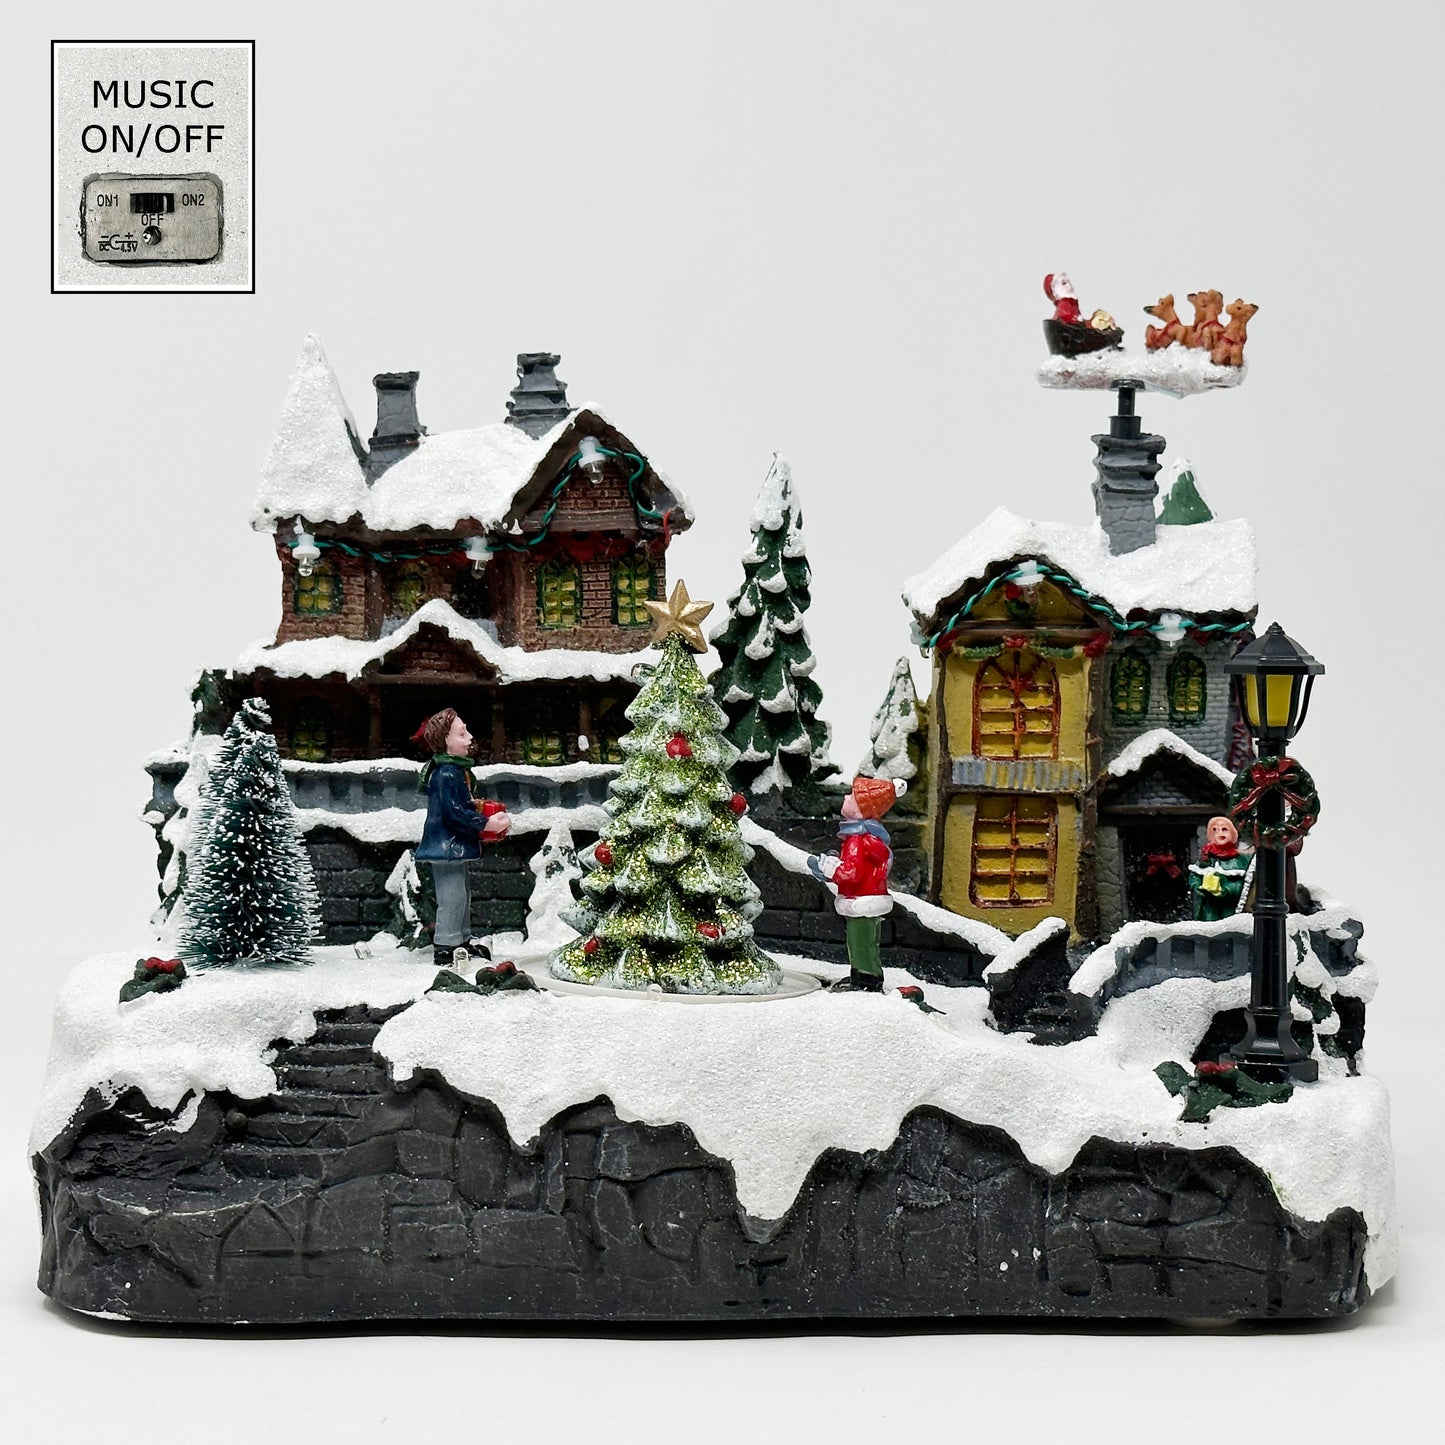 Crafted Polyresin Christmas House Collectable Figurine with USB and Battery Dual Power Source-Reindeer Flying Over Town-XH93418